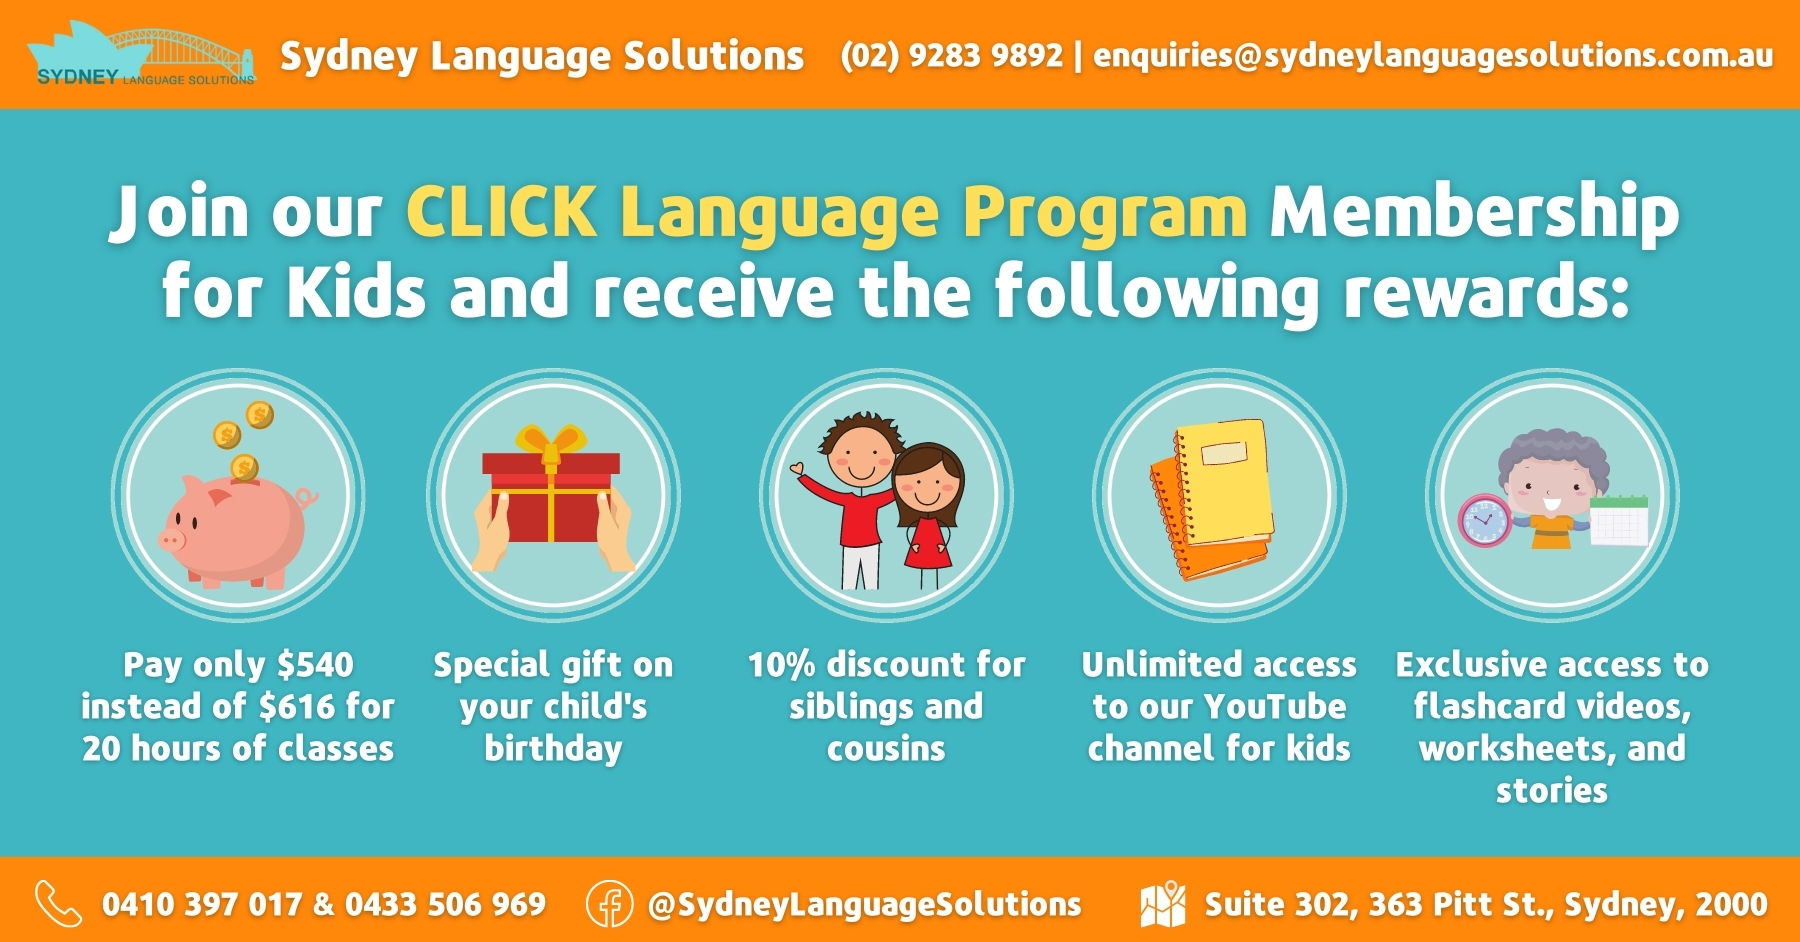 Perks of Joining our CLICK Language Membership Program